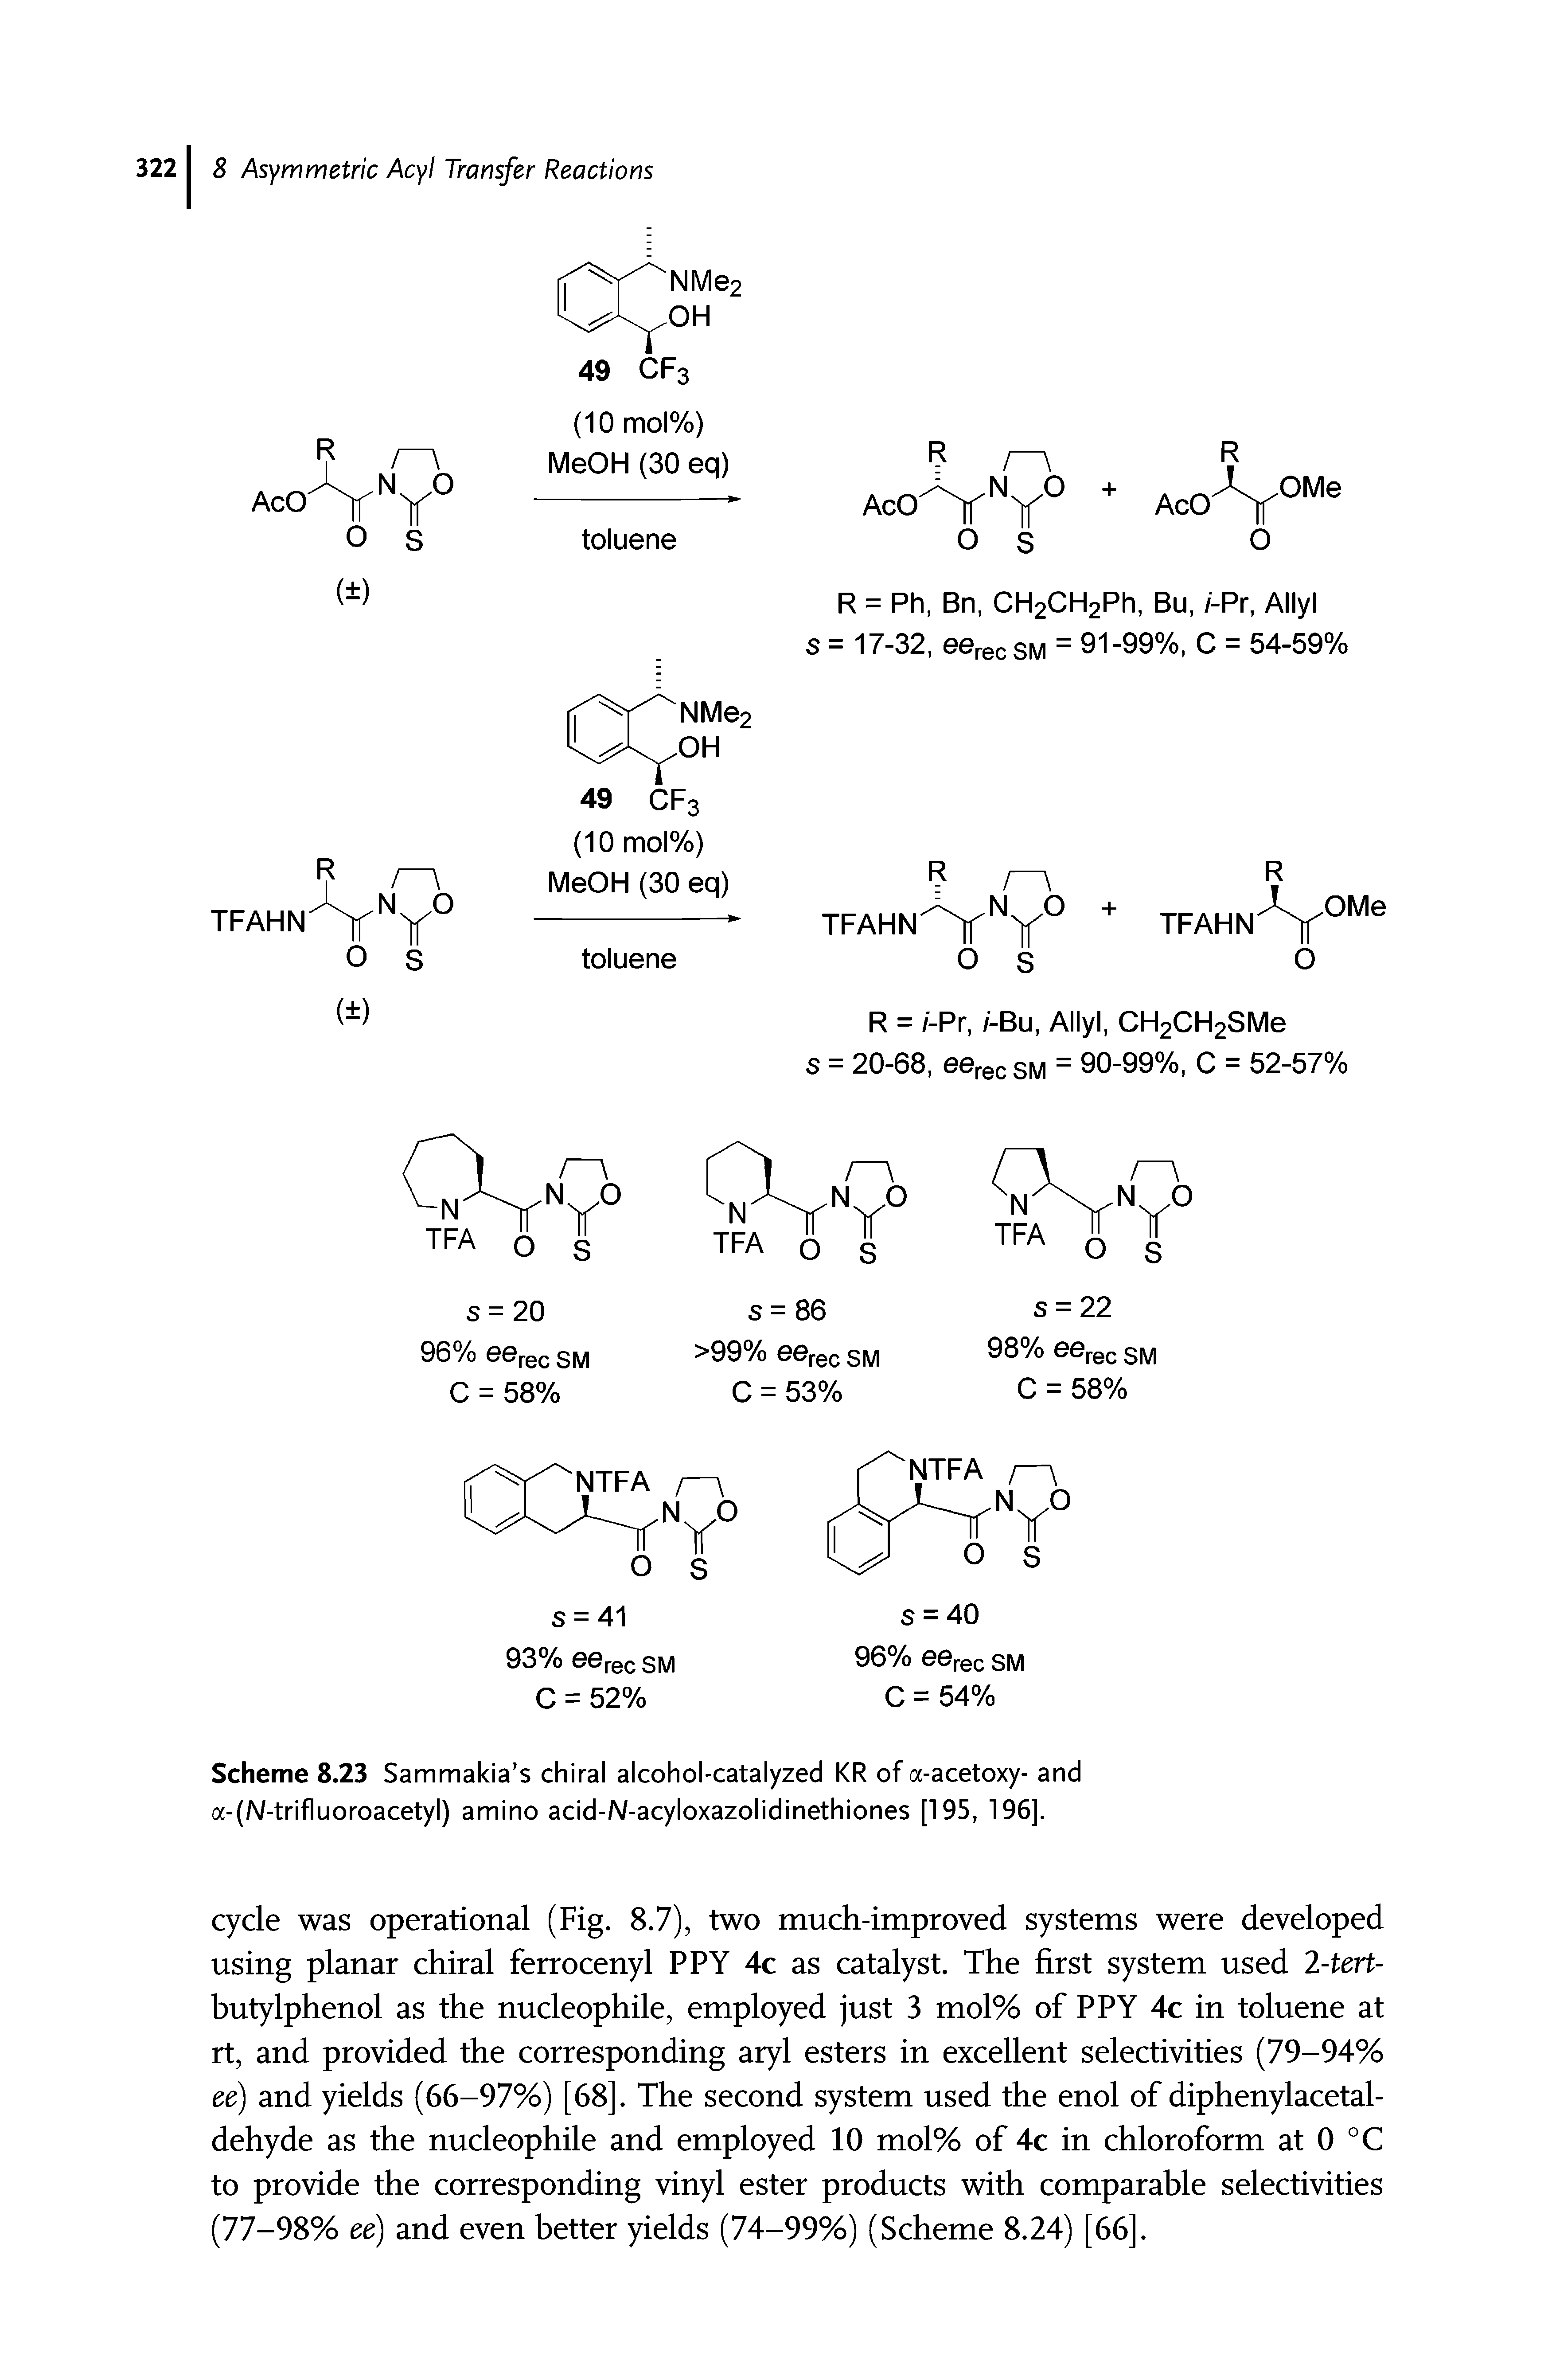 Scheme 8.23 Sammakia s chiral alcohol-catalyzed KR of a-acetoxy- and a-(/V-trifluoroacetyl) amino acid-N-acyloxazolidinethiones [195, 196].